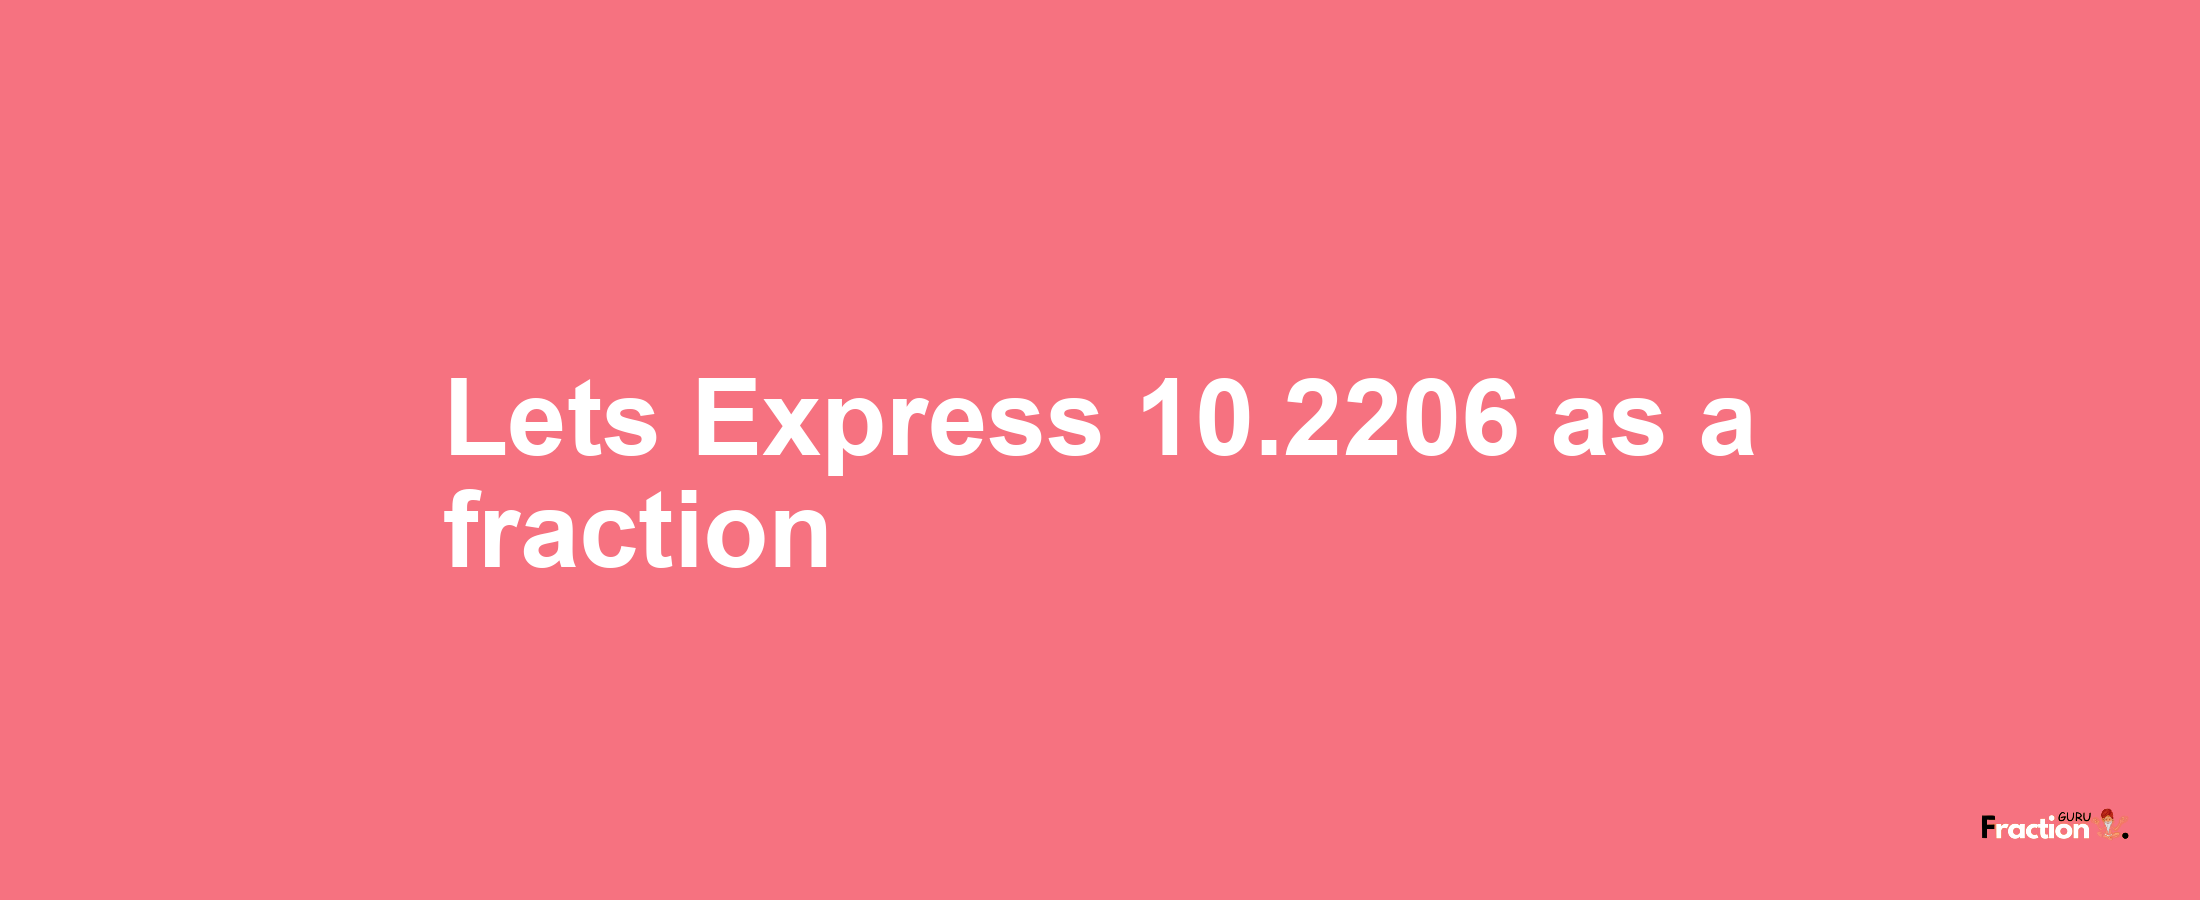 Lets Express 10.2206 as afraction